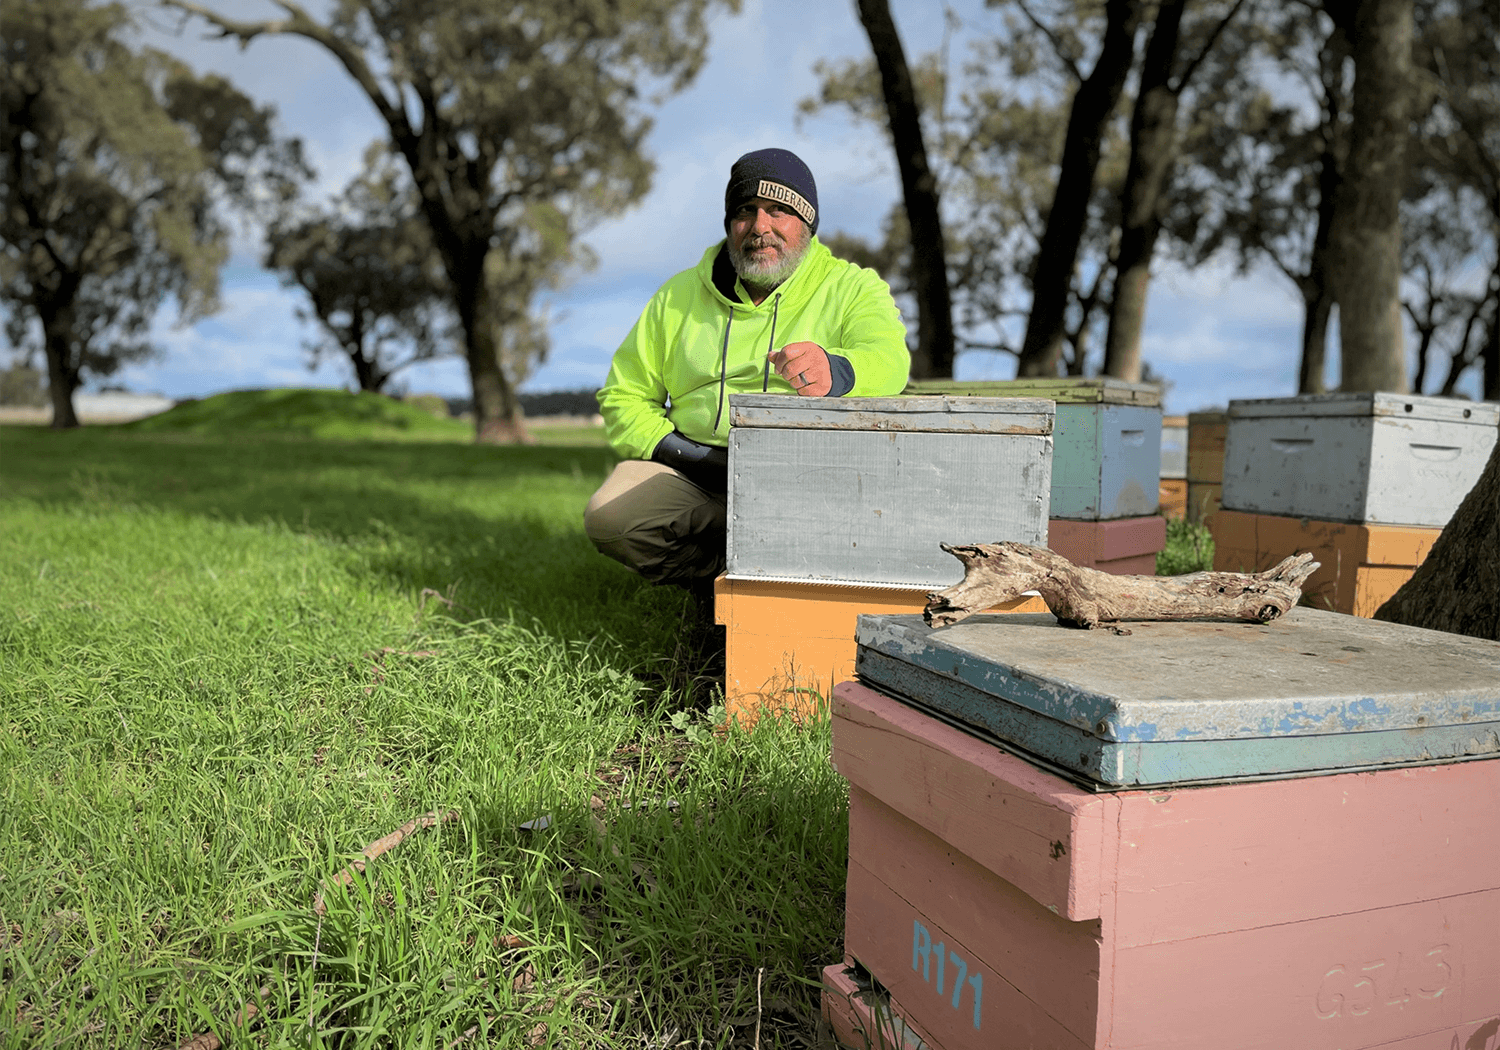 Victorias-First-Nations-led-regenerative-farming-program-changing-lives-one-beehive-at-a-time-1